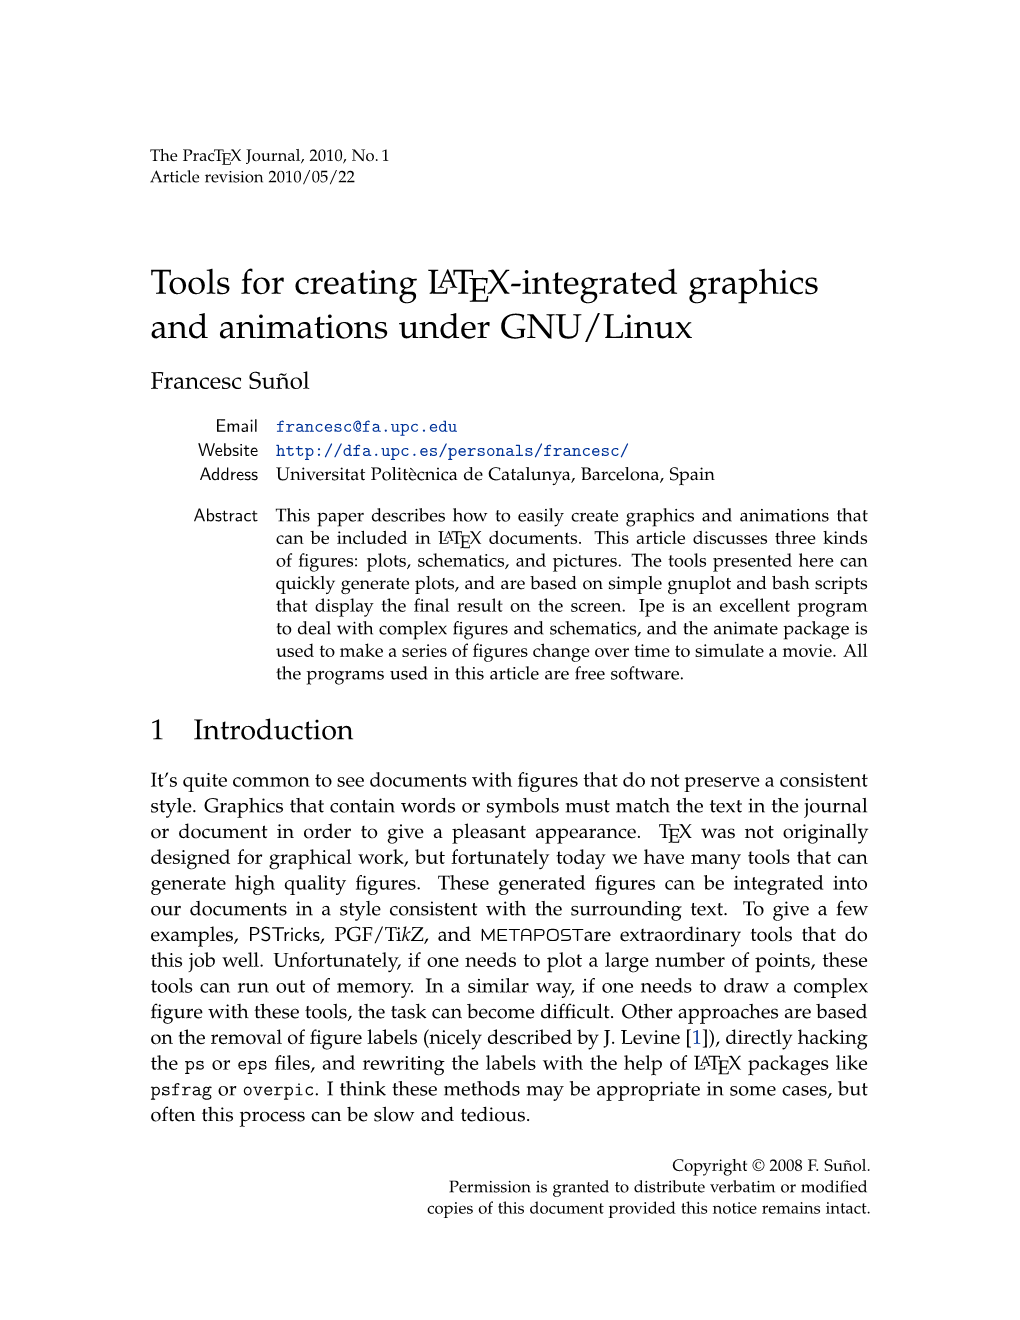 Tools for Creating LATEX-Integrated Graphics and Animations Under GNU/Linux Francesc Suñol